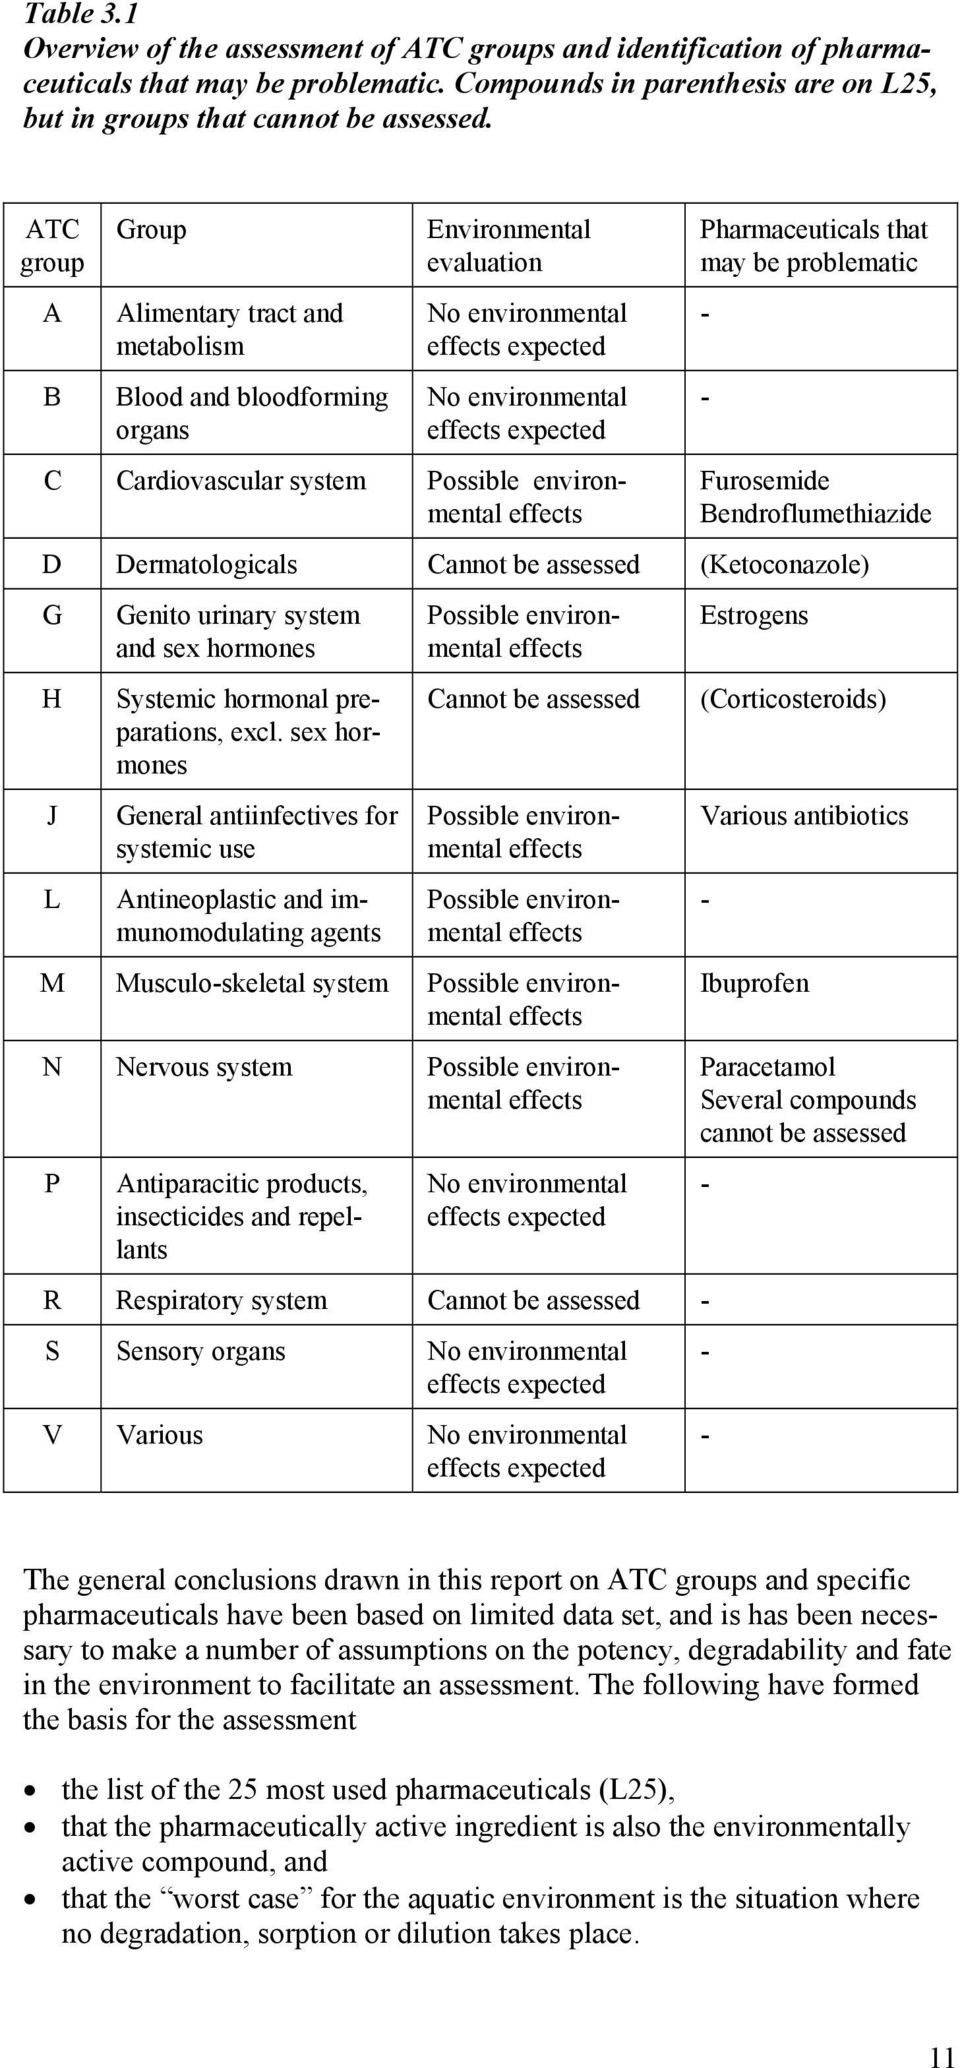 Possible environmental effects Pharmaceuticals that may be problematic - - Furosemide Bendroflumethiazide D Dermatologicals Cannot be assessed (Ketoconazole) G H J L Genito urinary system and sex